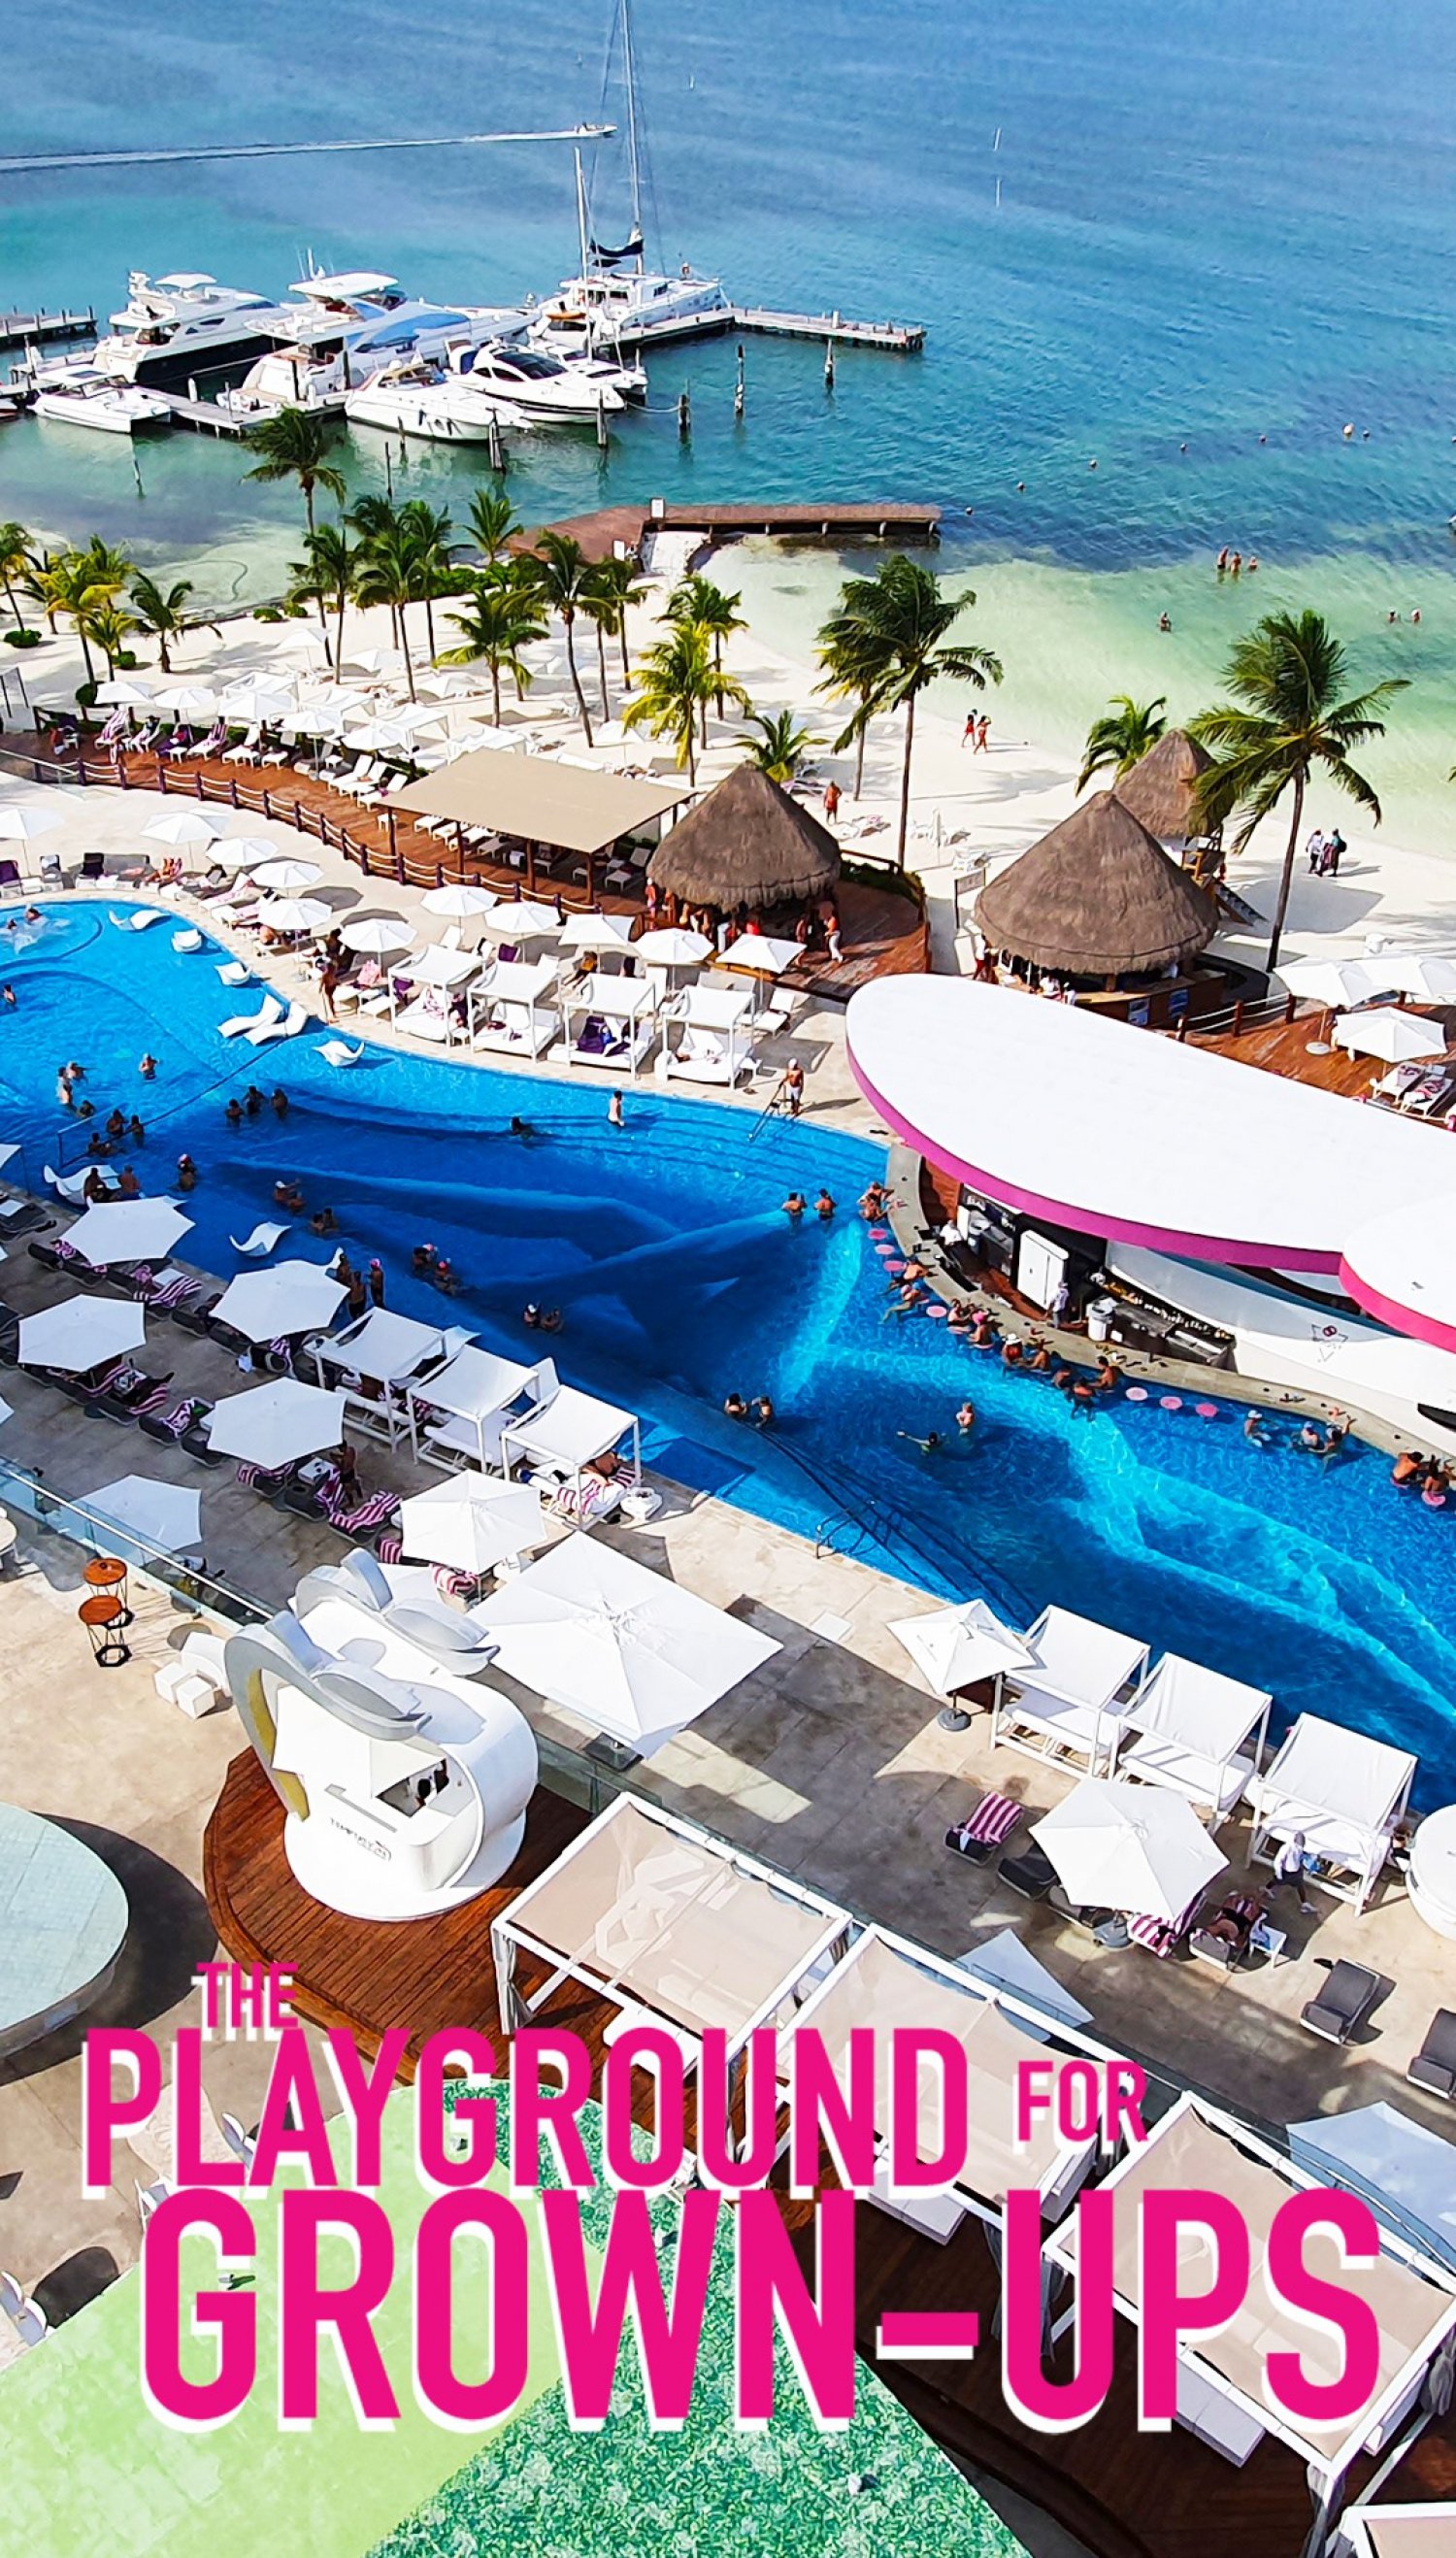 Best hotels for family holidays in Cancun